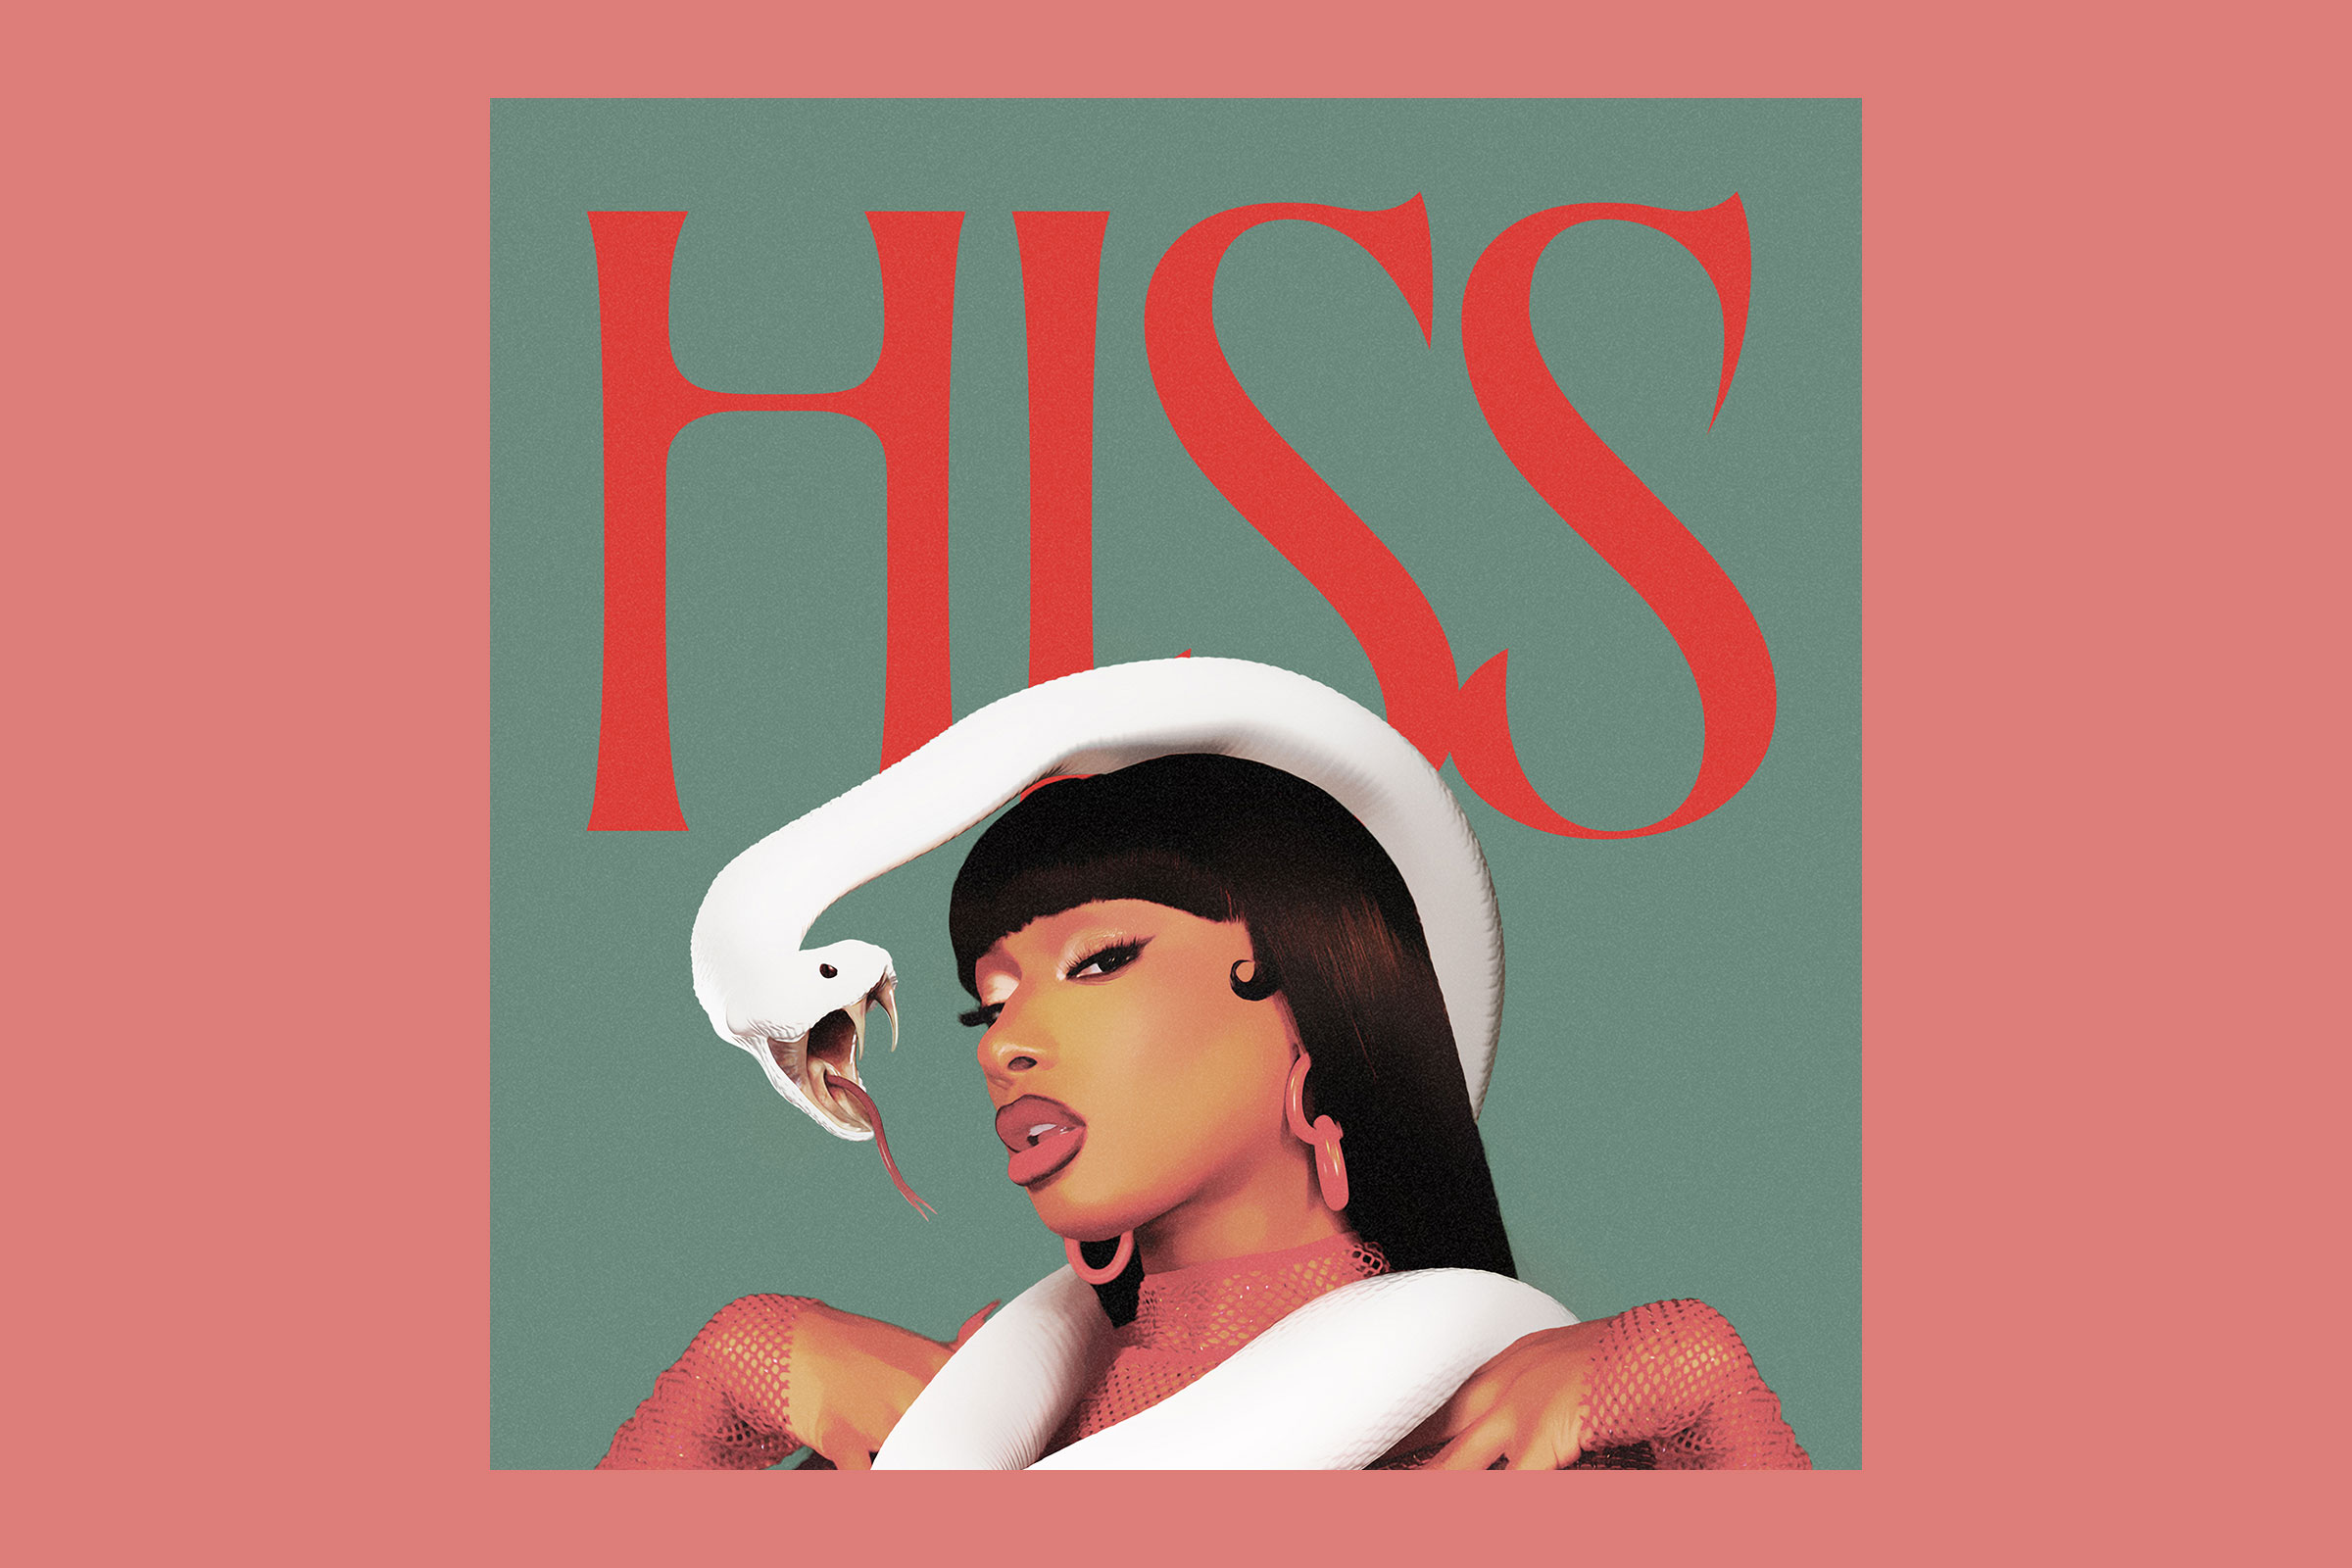 cover for Megan Thee Stallion’s single “HISS”